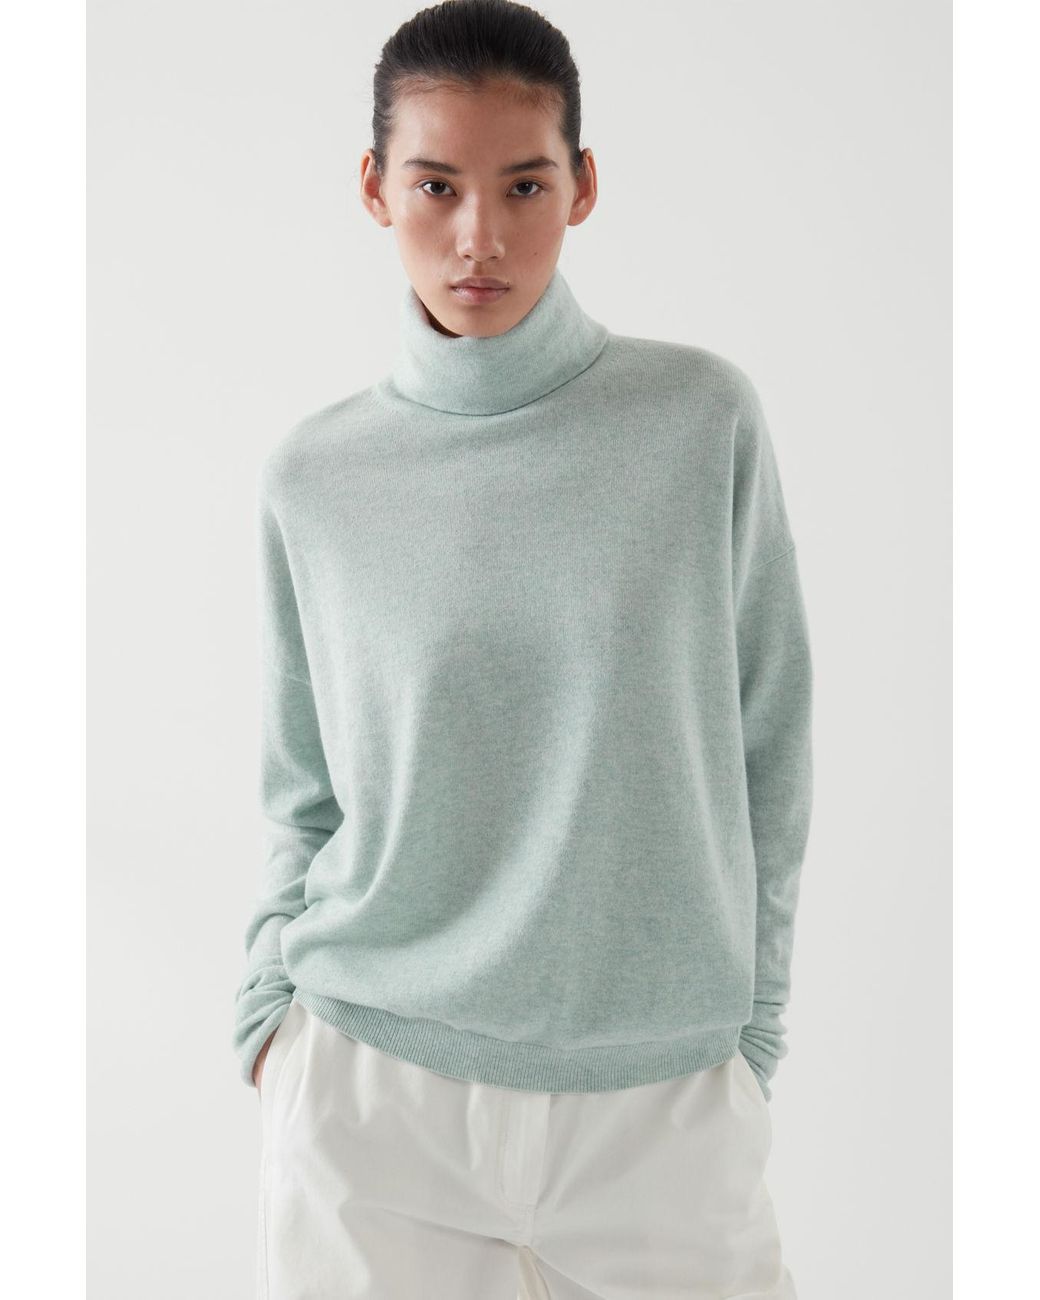 COS Turtleneck Cashmere Sweater in Green | Lyst